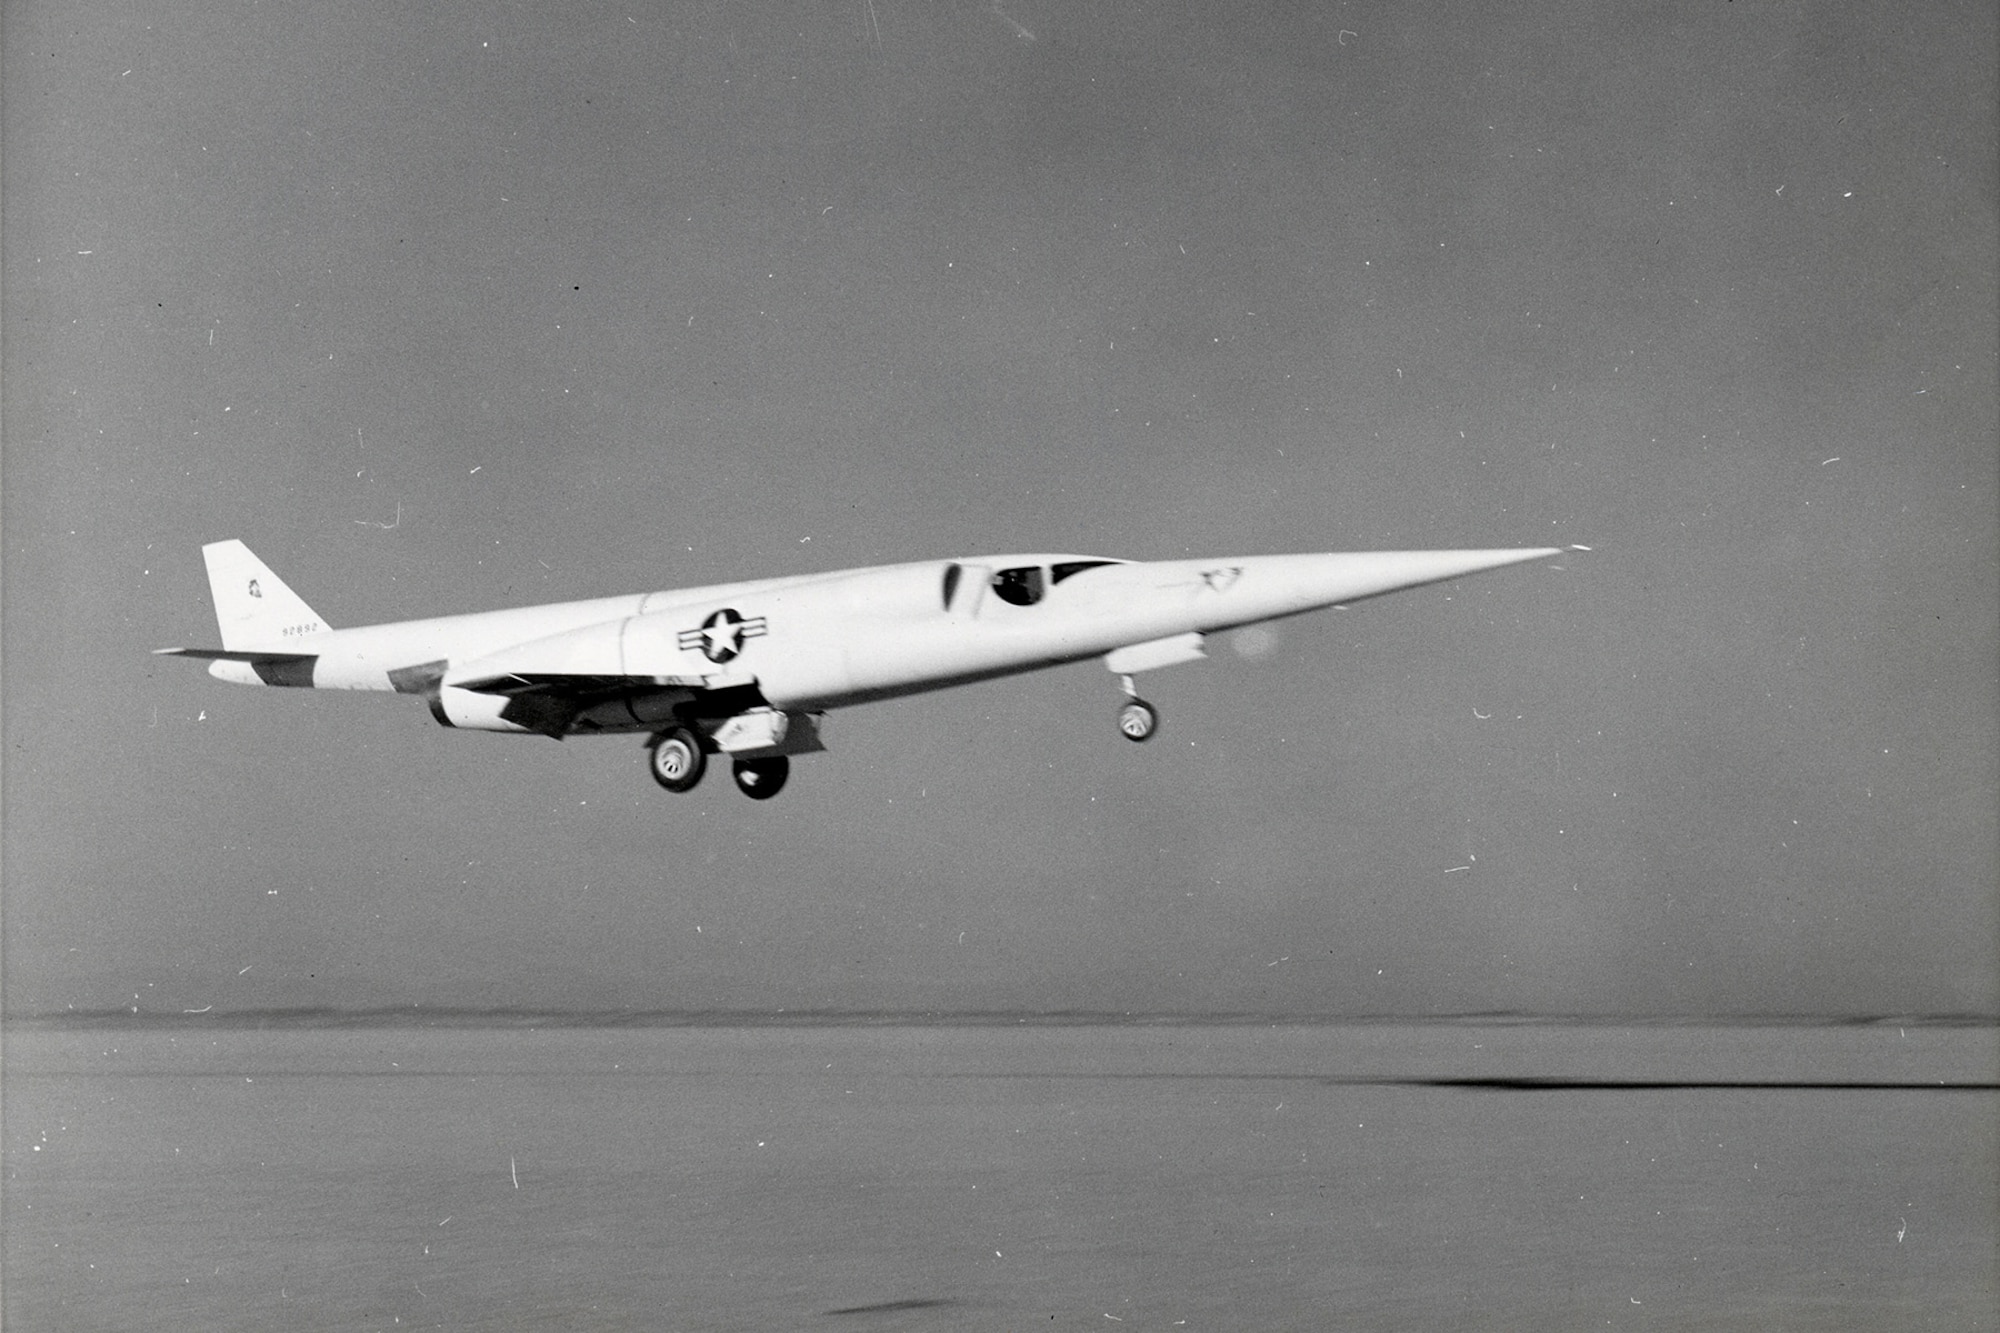 Unlike the X-1 and X-2, which were released in mid-air from carrier aircraft, the X-3 operated in a more conventional manner by taking off from the ground. (U.S. Air Force photo)